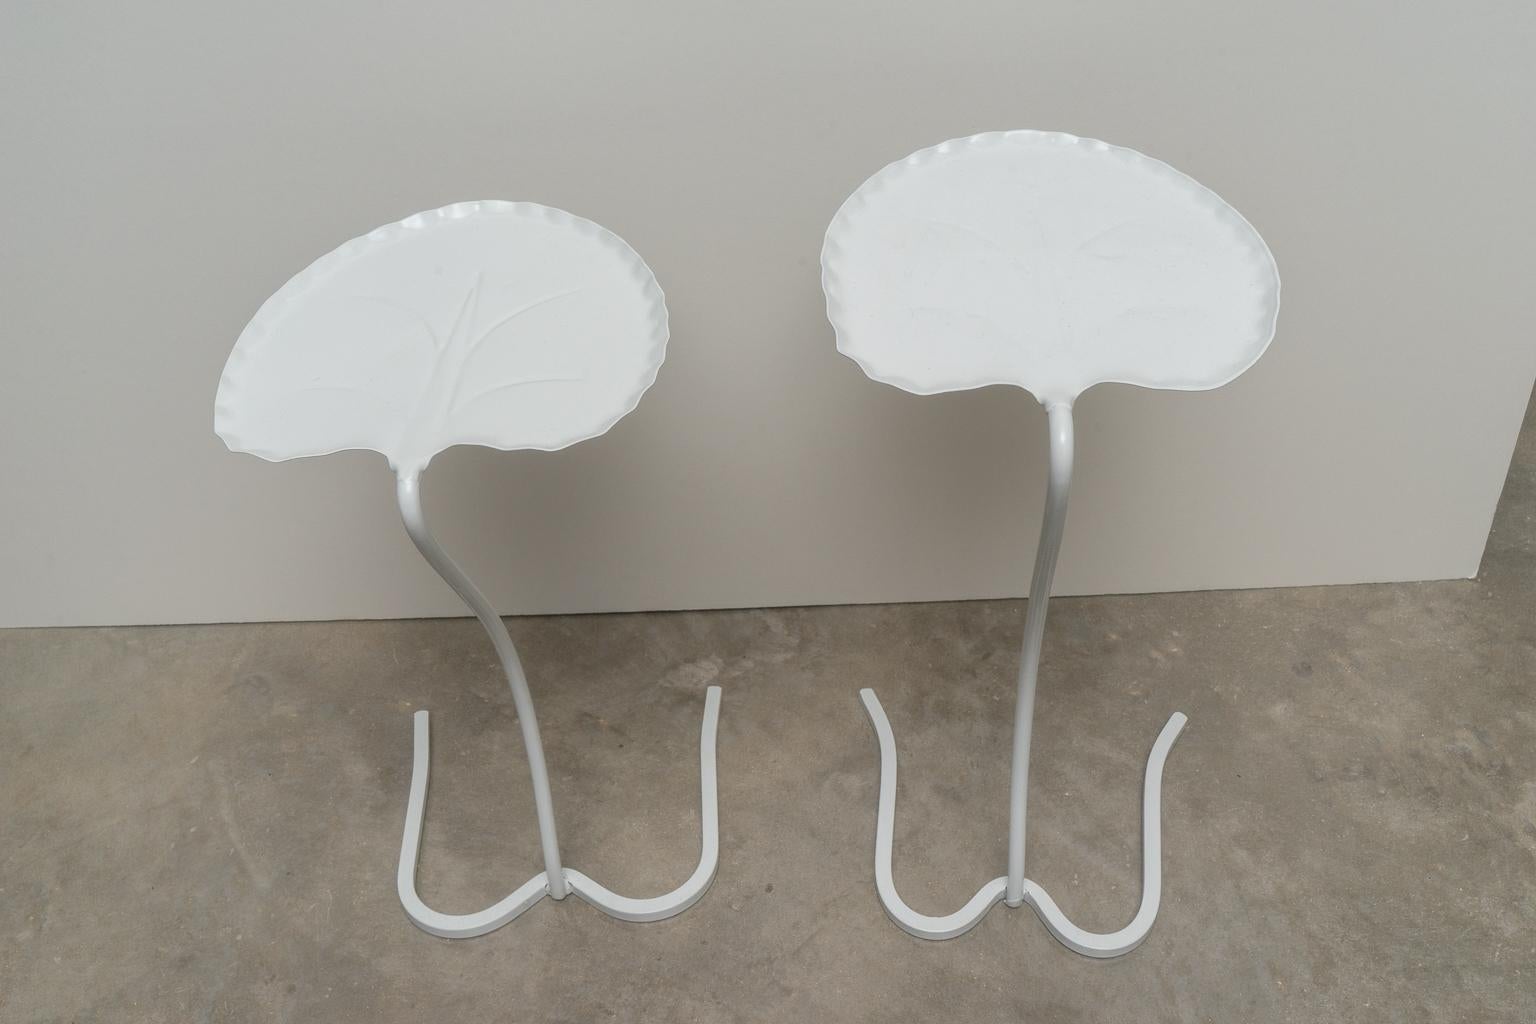 Powder-Coated Set of Lily Pad Patio Tables